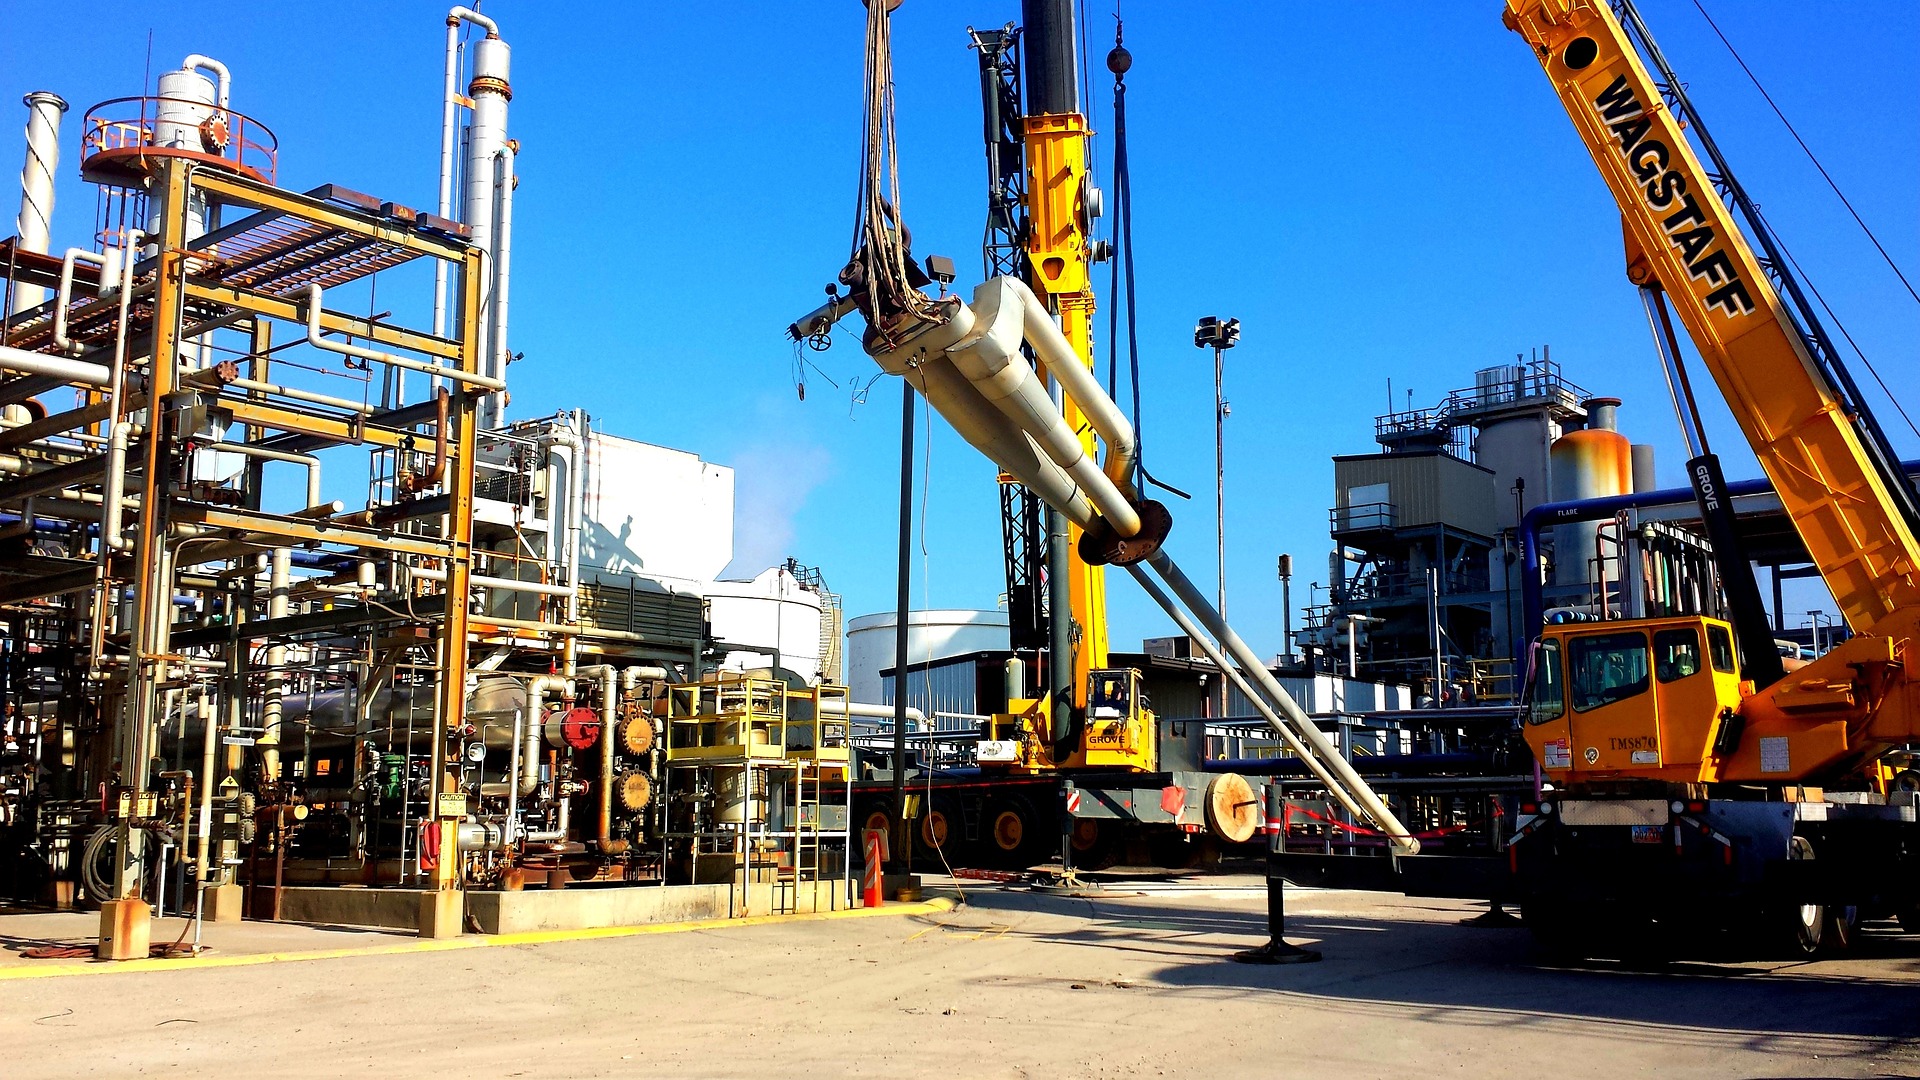 An image of a crane lifting oil and gas machinery